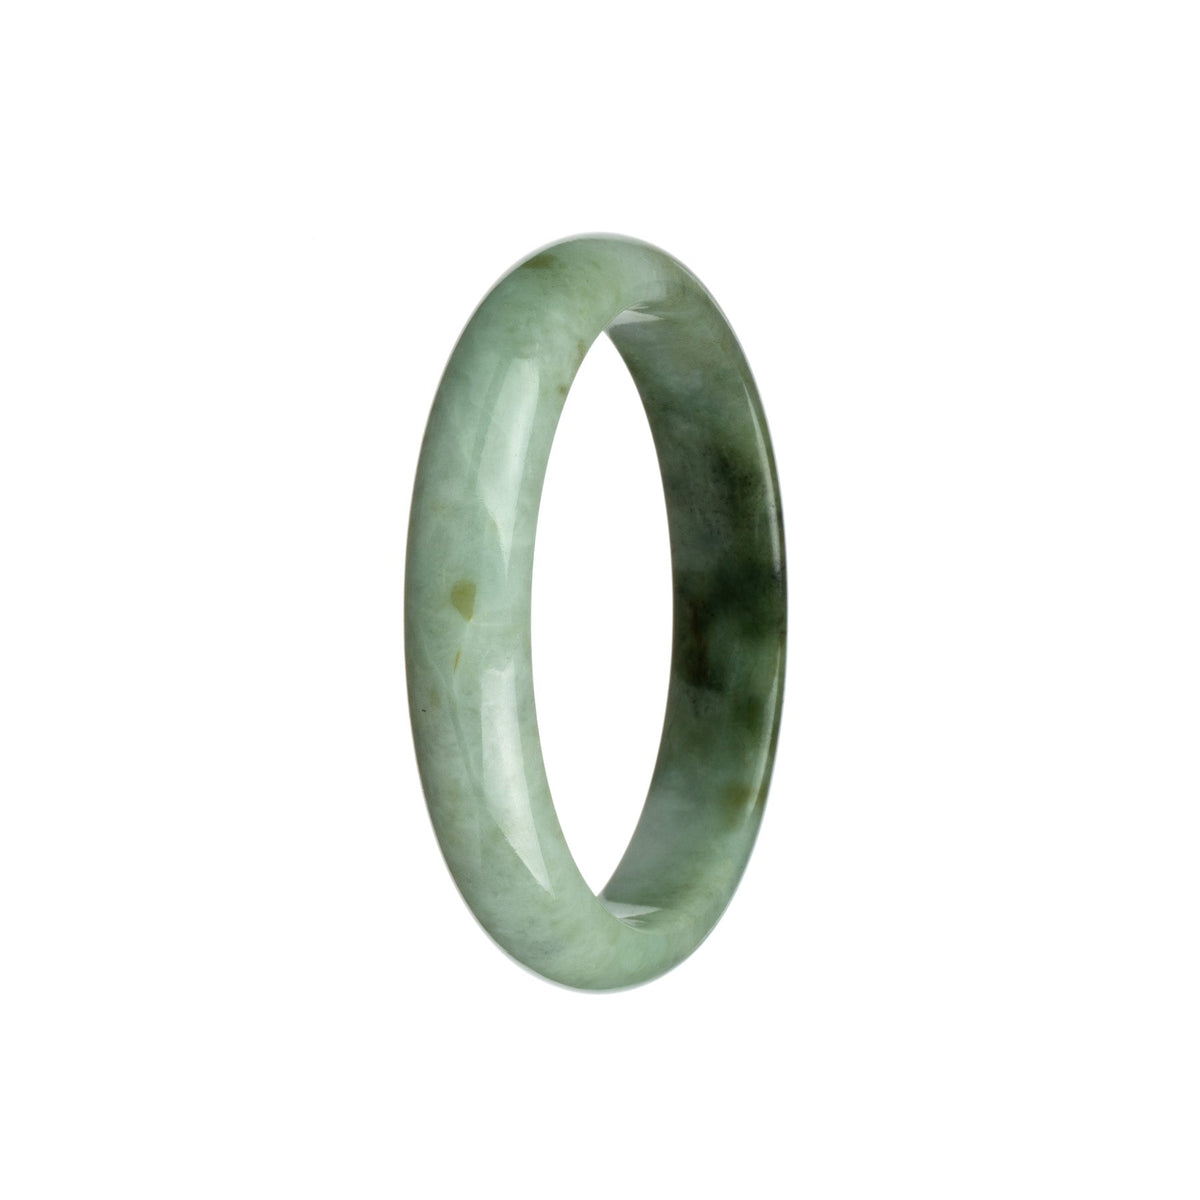 A half-moon shaped traditional jade bracelet made of real natural grey jade with hints of olive green.